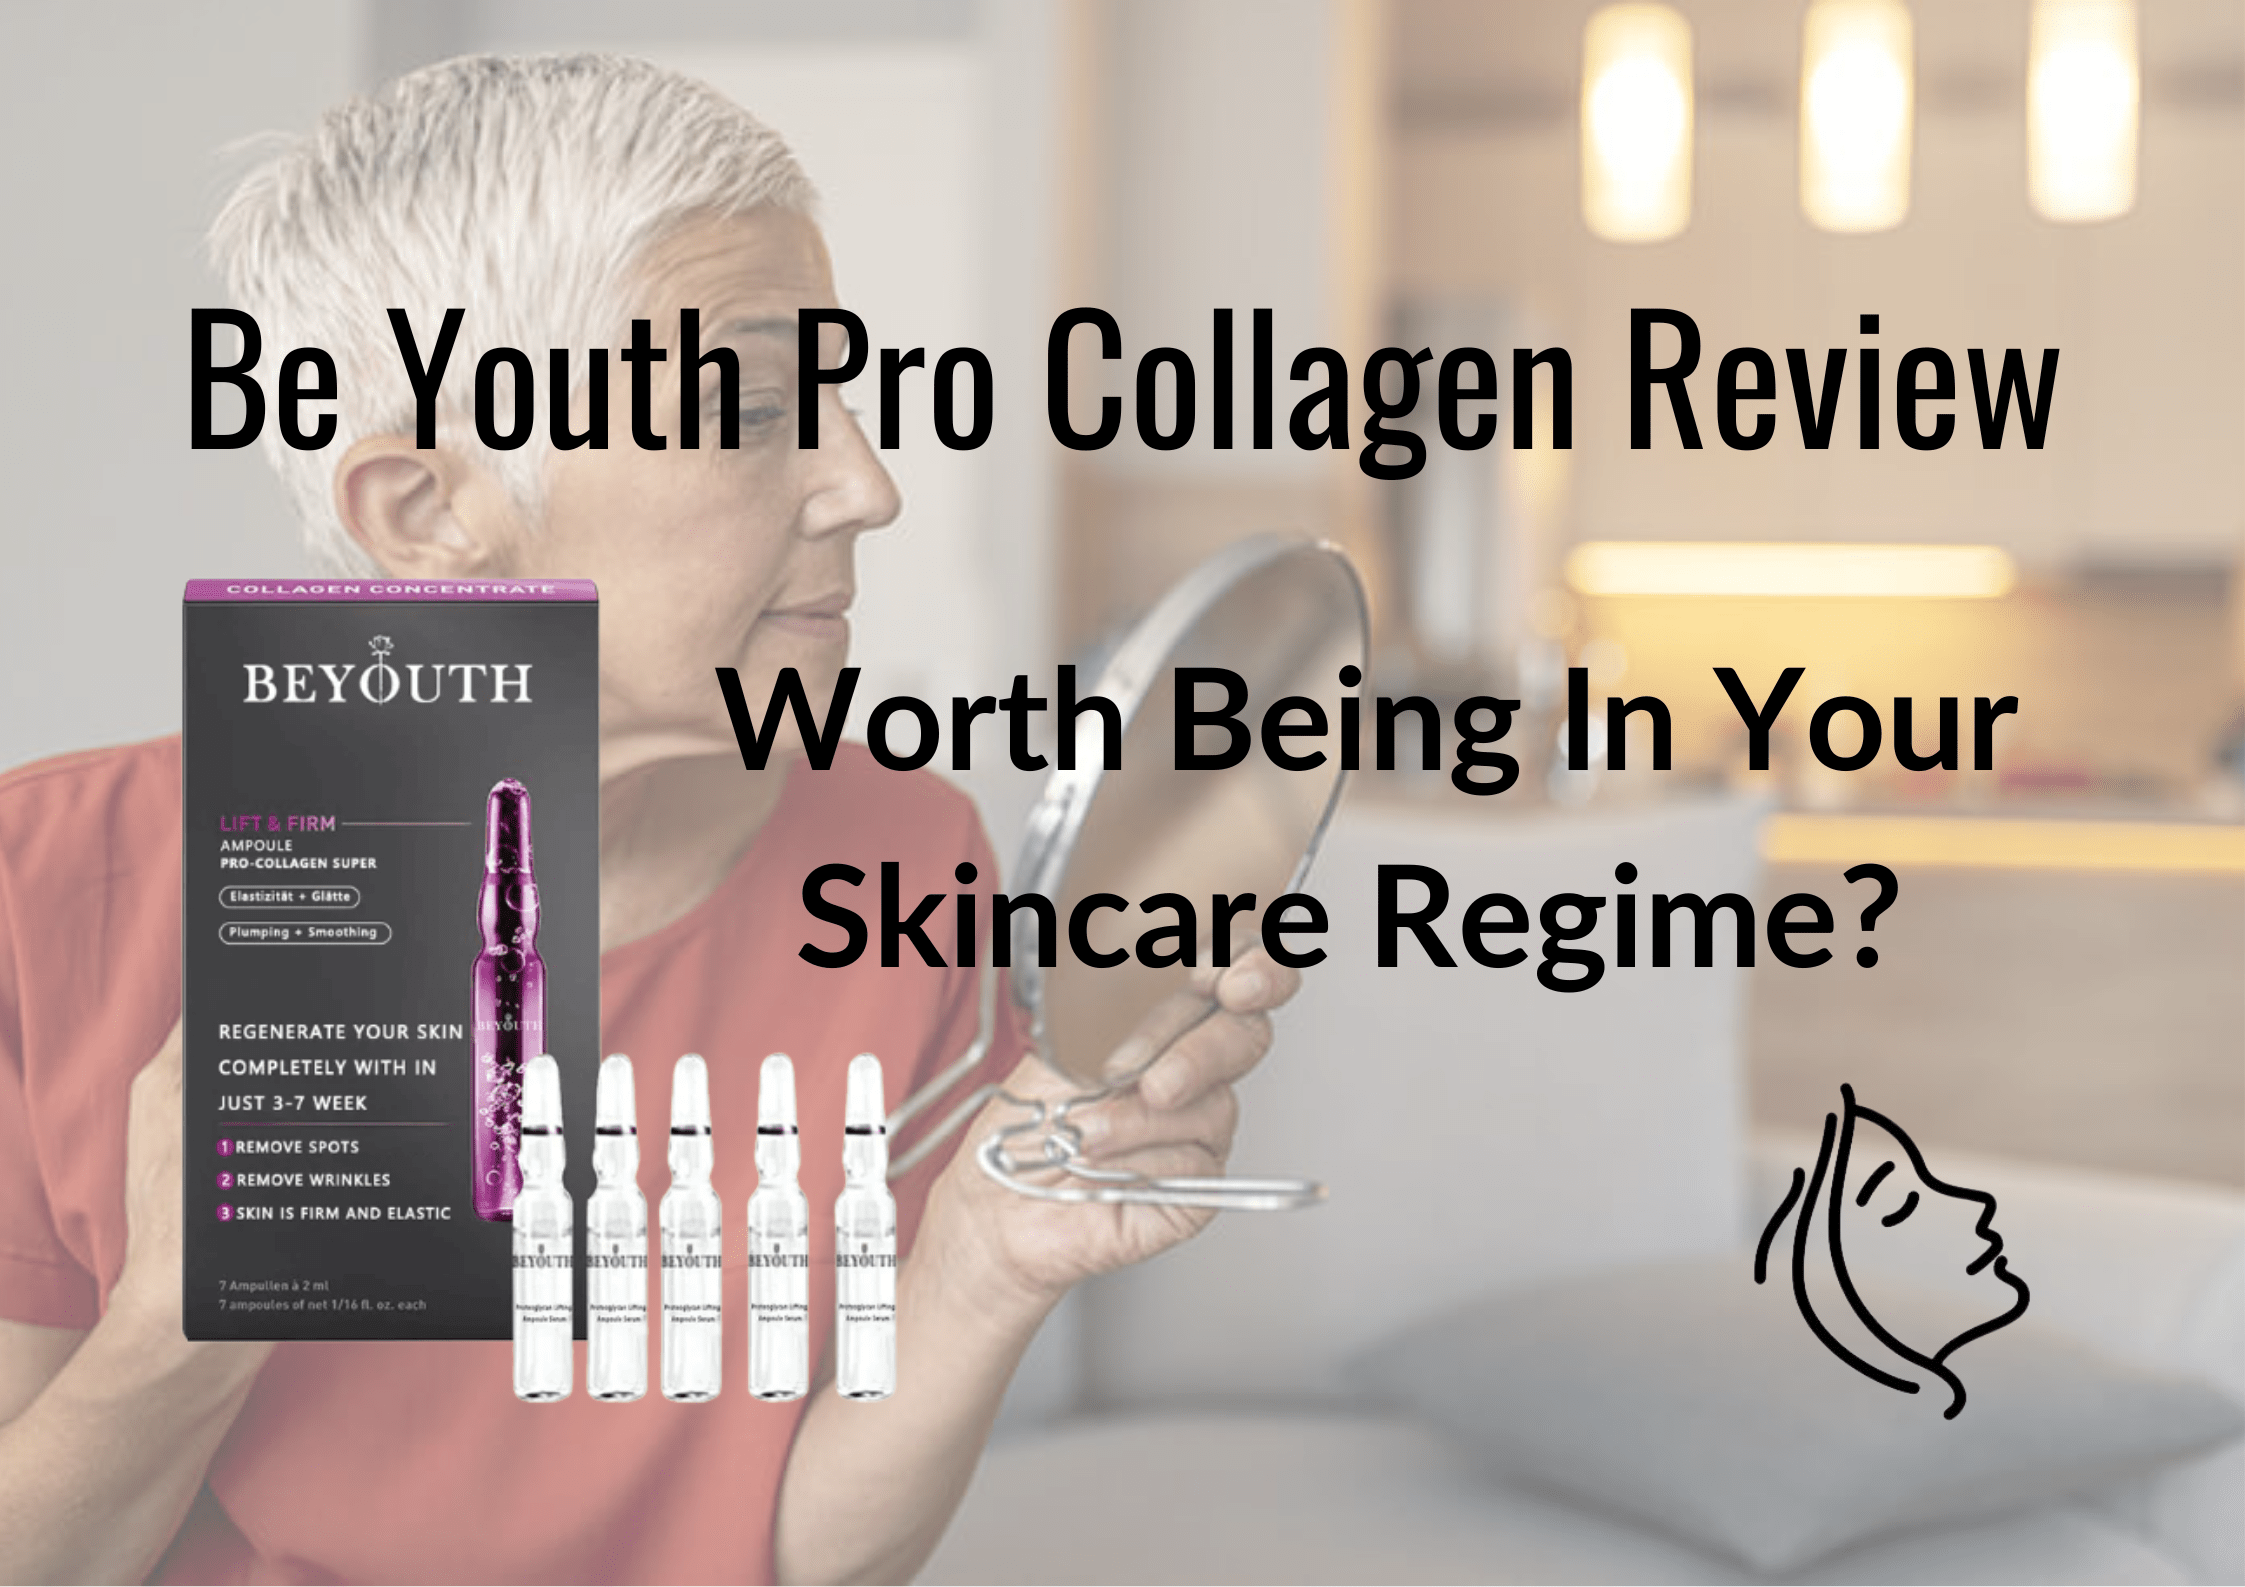 Be Youth Pro Collagen Reviews